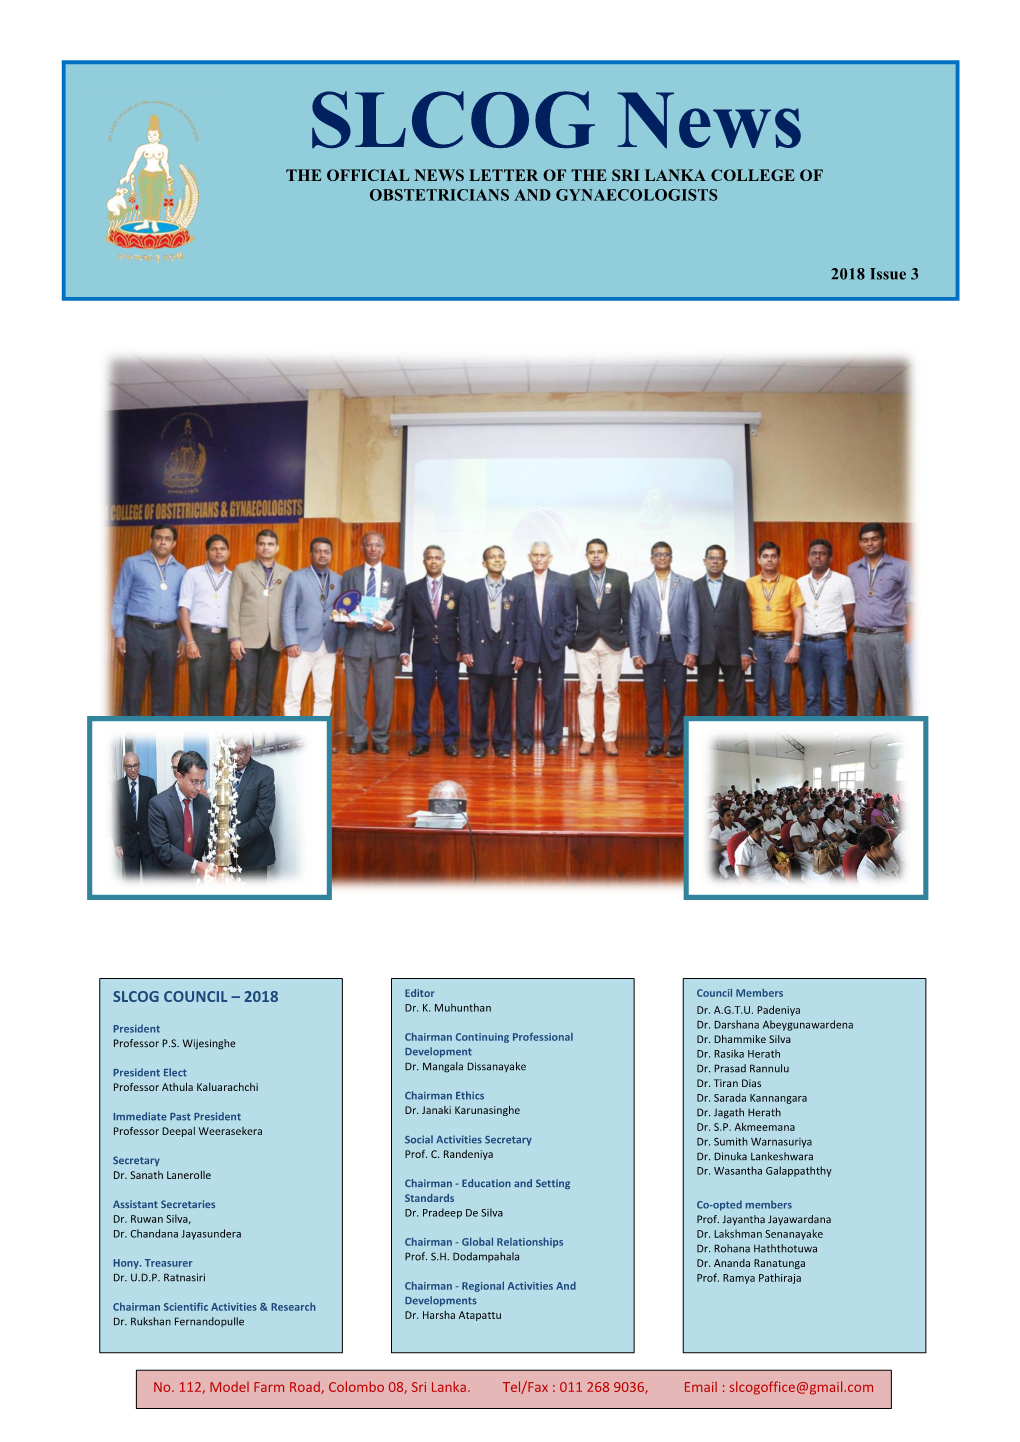 SLCOG News the OFFICIAL NEWS LETTER of the SRI LANKA COLLEGE of OBSTETRICIANS and GYNAECOLOGISTS